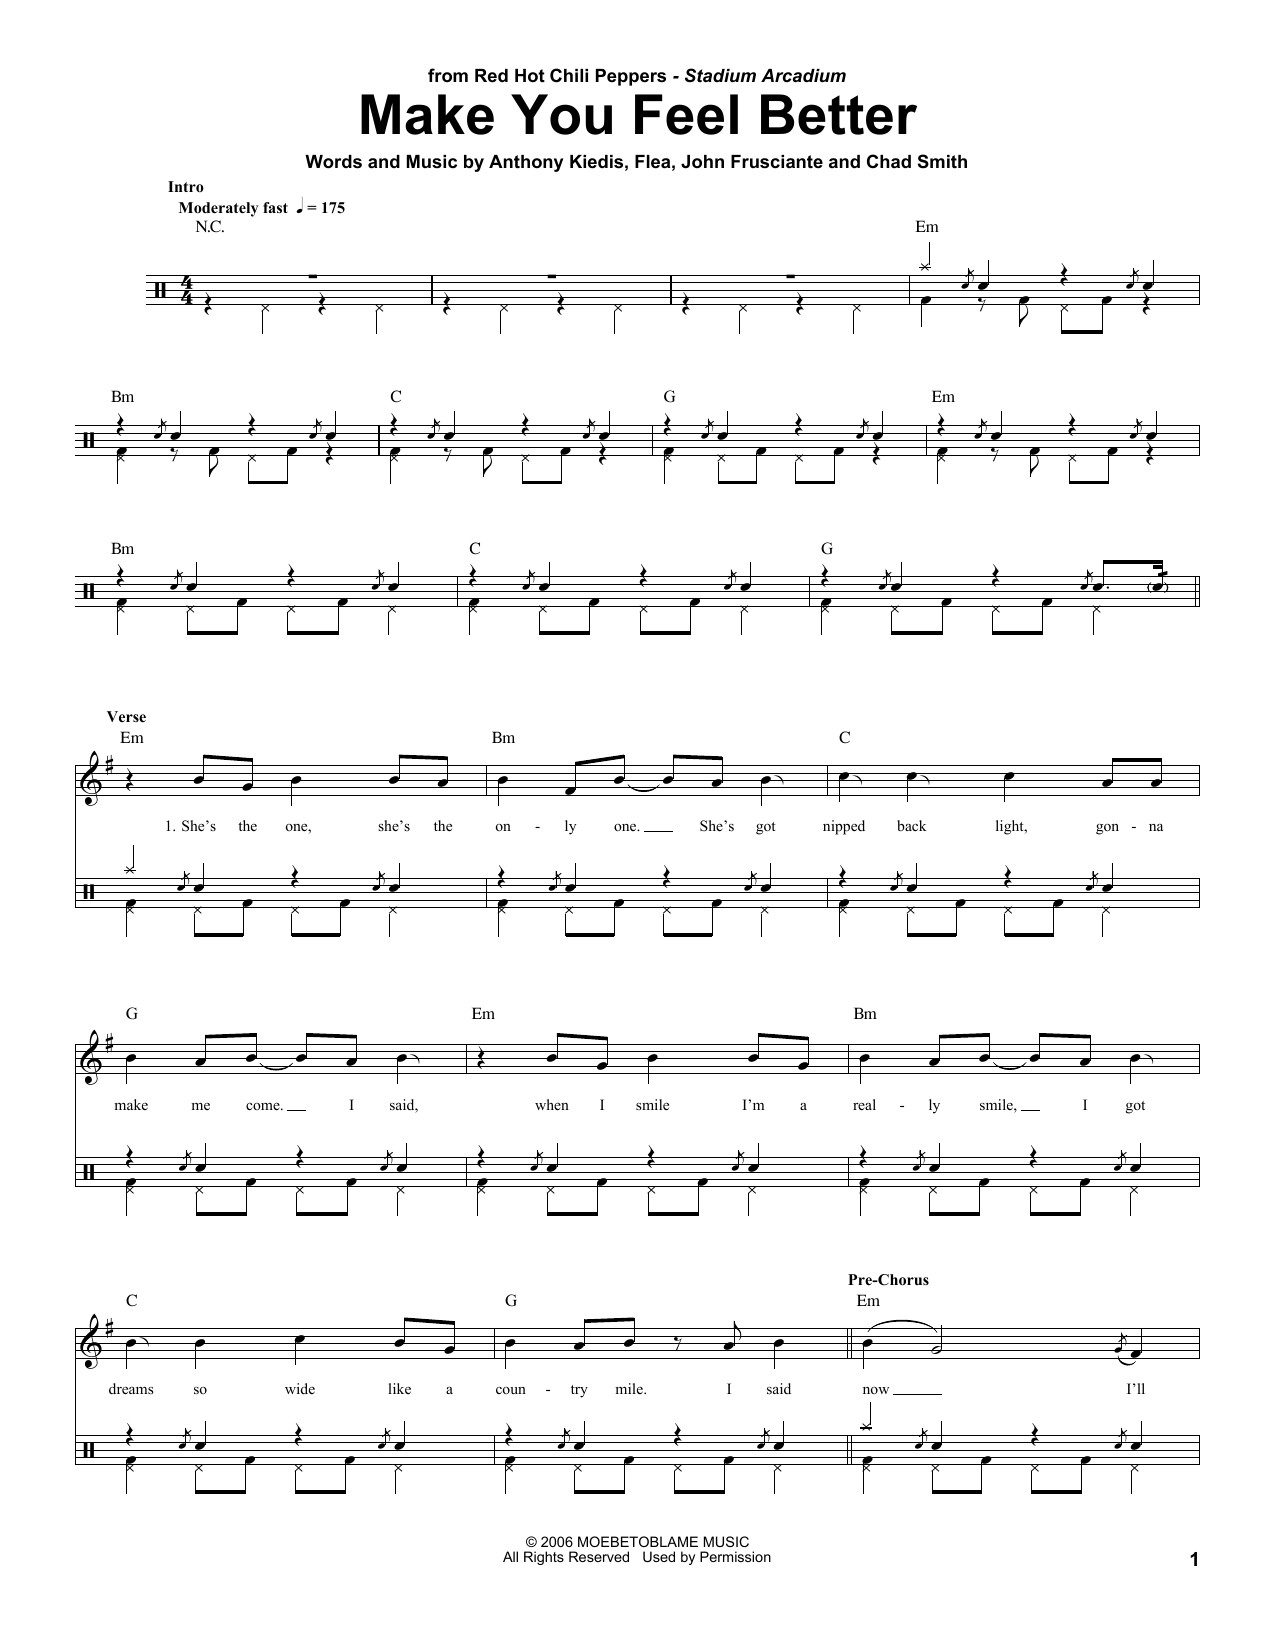 Download Red Hot Chili Peppers Make You Feel Better Sheet Music